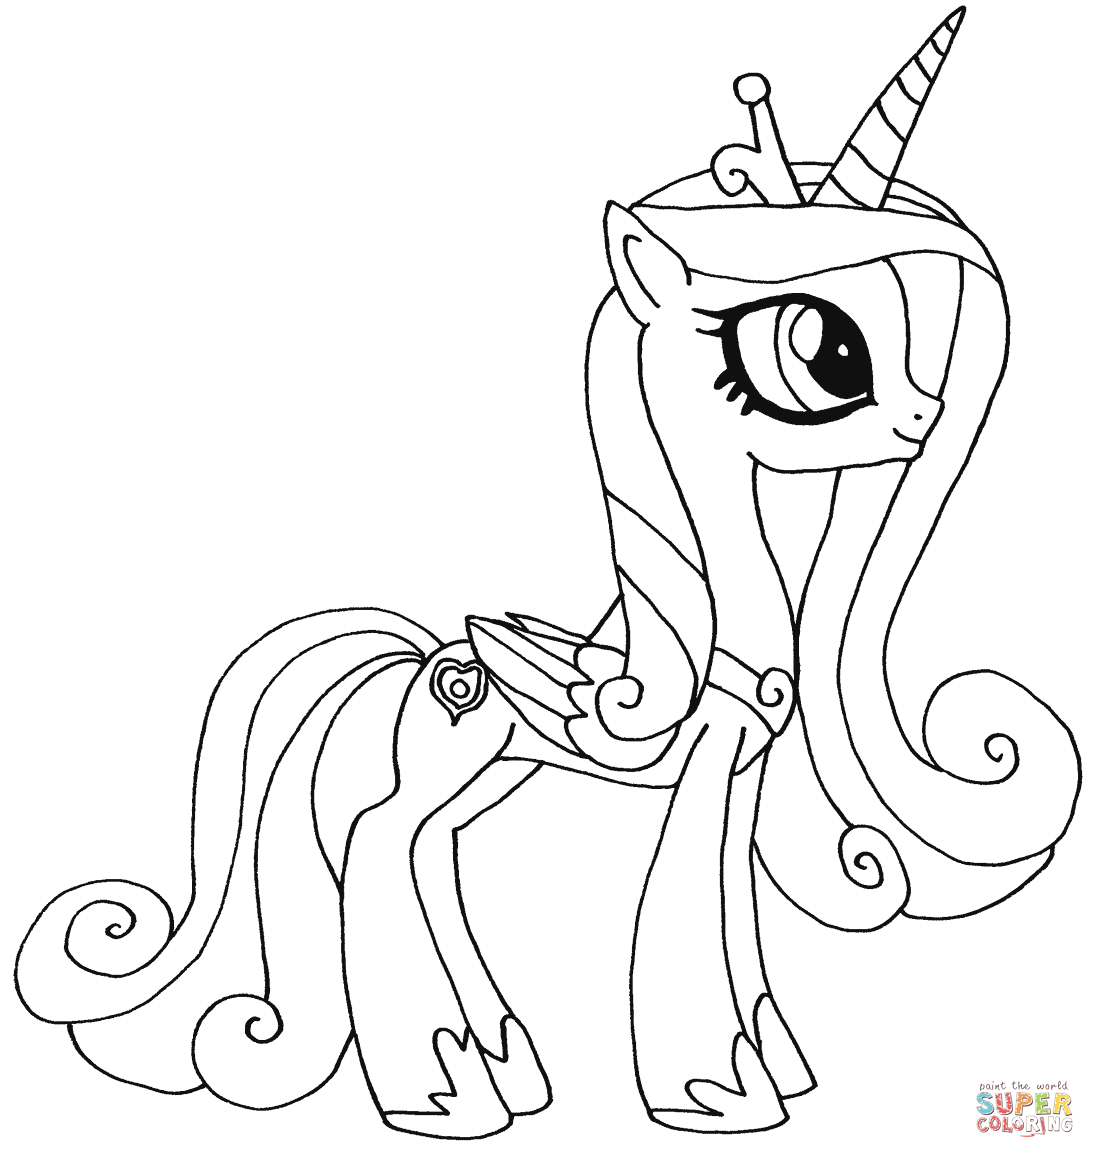 My Little Pony Coloring Pages | Free Coloring Pages - Free Printable Coloring Pages Of My Little Pony